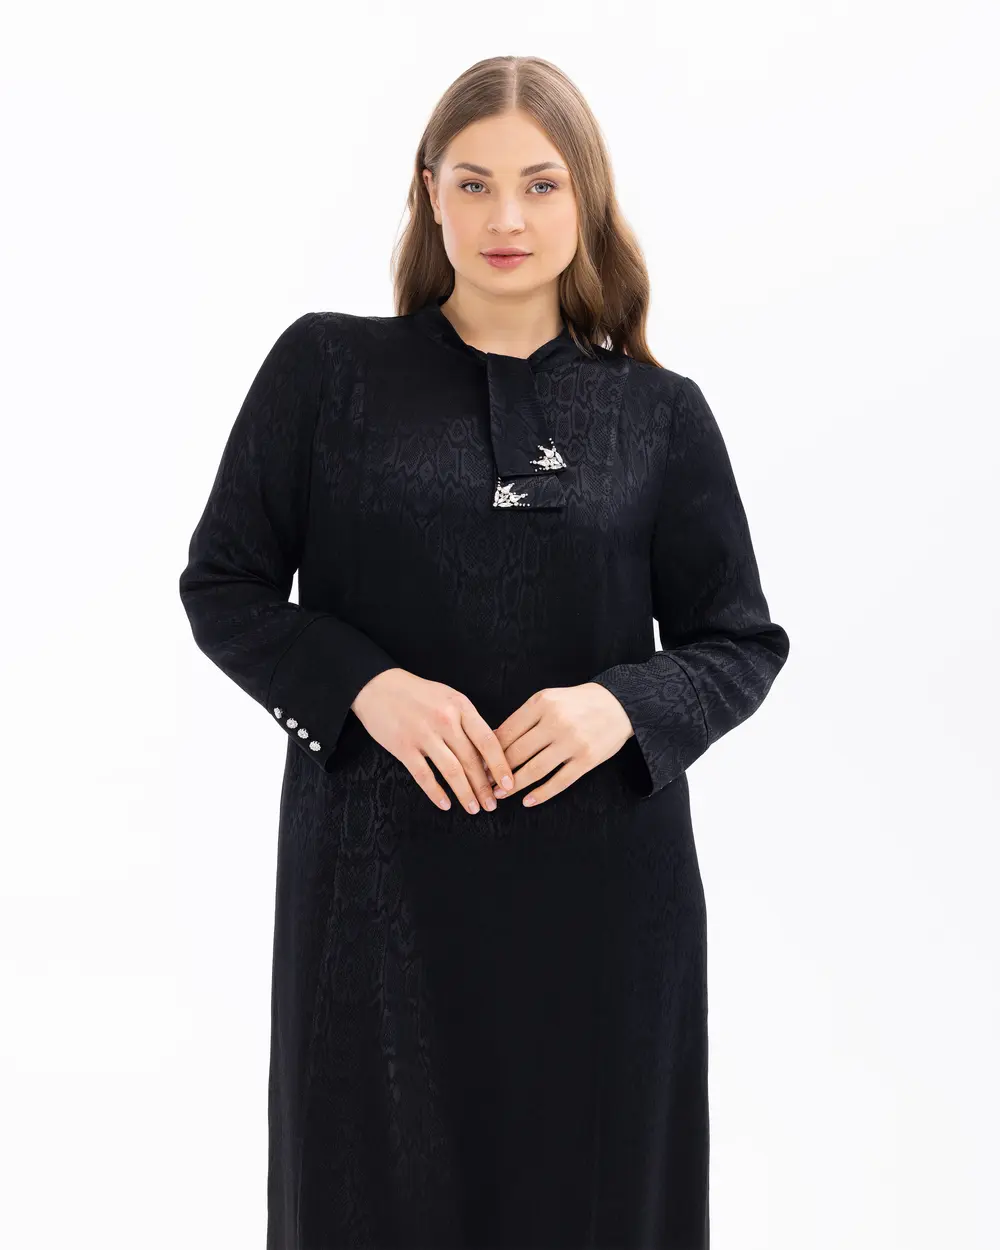 Plus Size Patterned Collared Dress